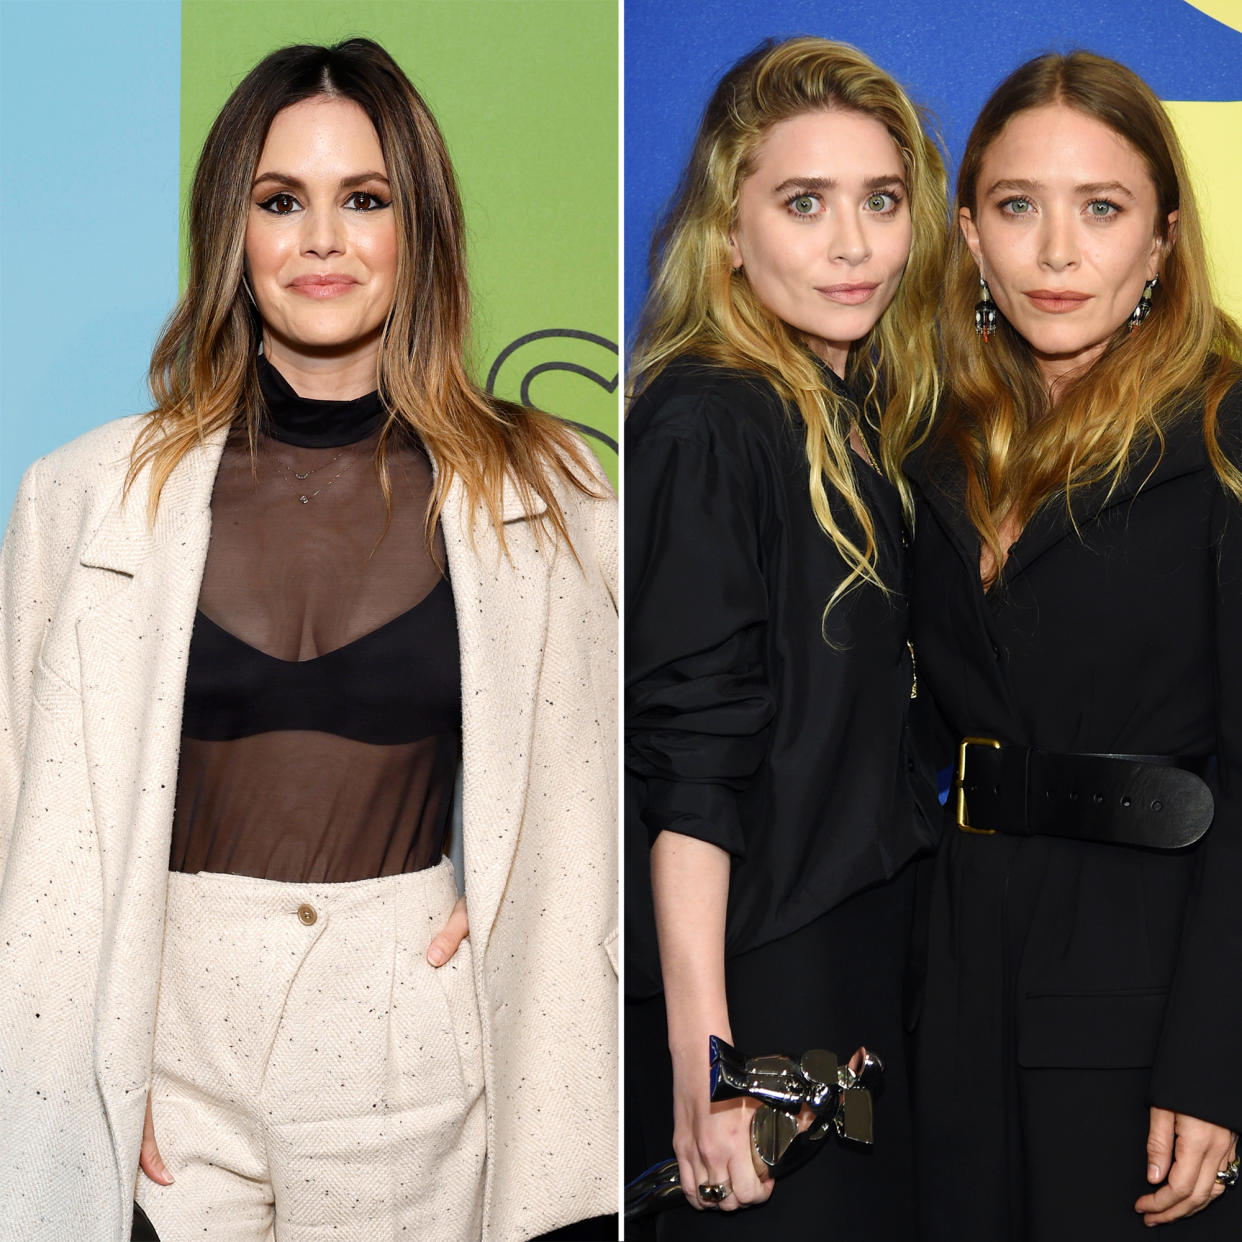 Rachel Bilson Says Olsen Twins 'Rescued' Her From Mob of Adam Brody Fans